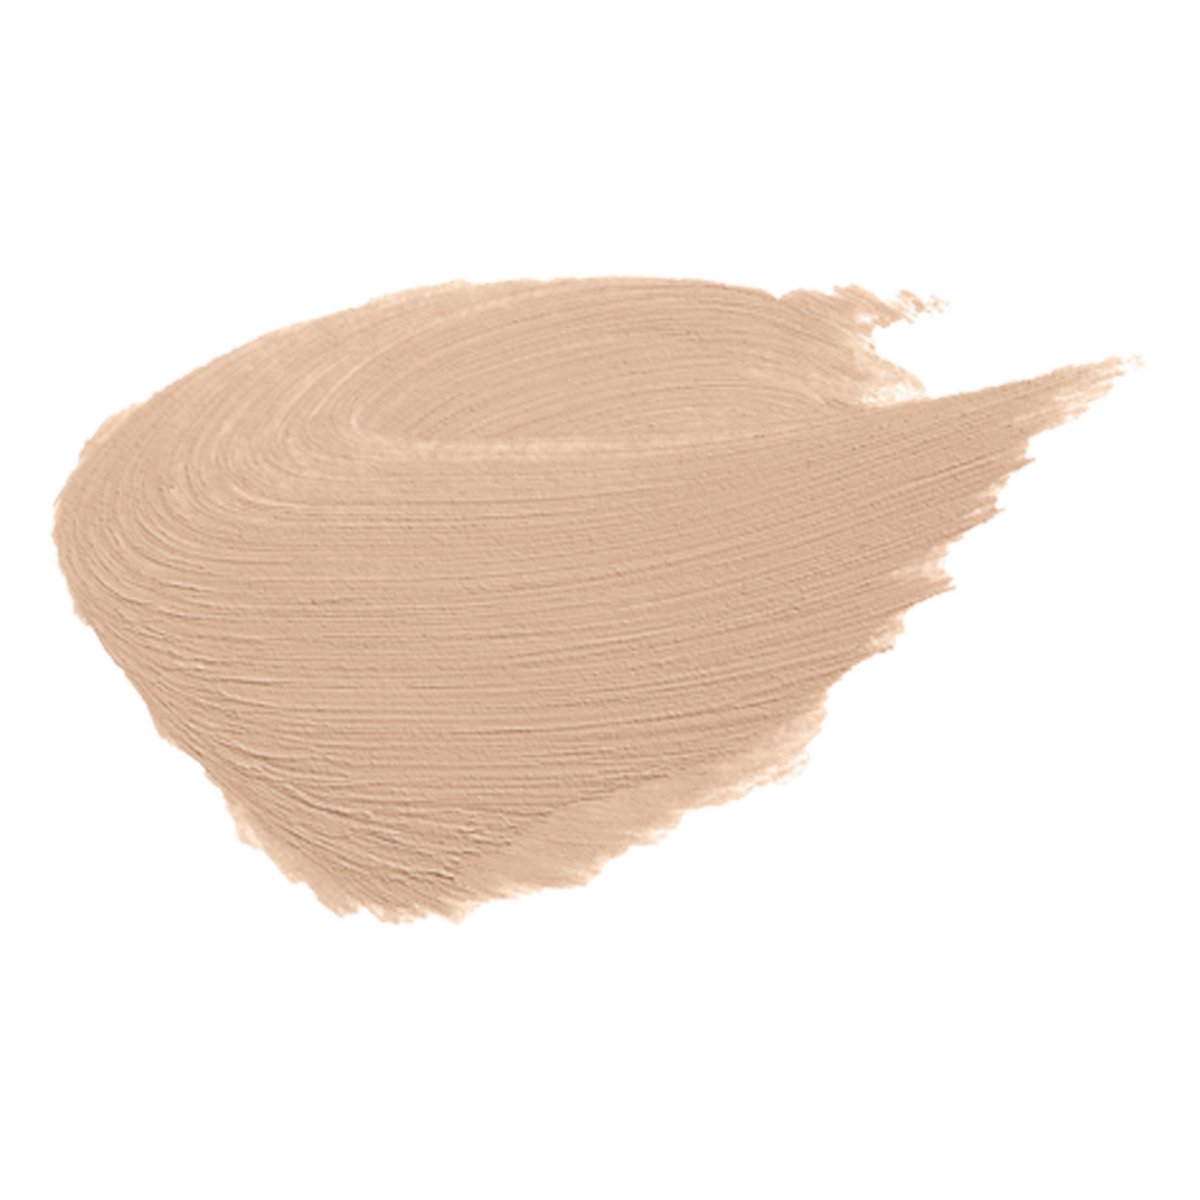 Primary Image of  Mineral High Protection Tinted Compact SPF 50 - Beige Color Swatch